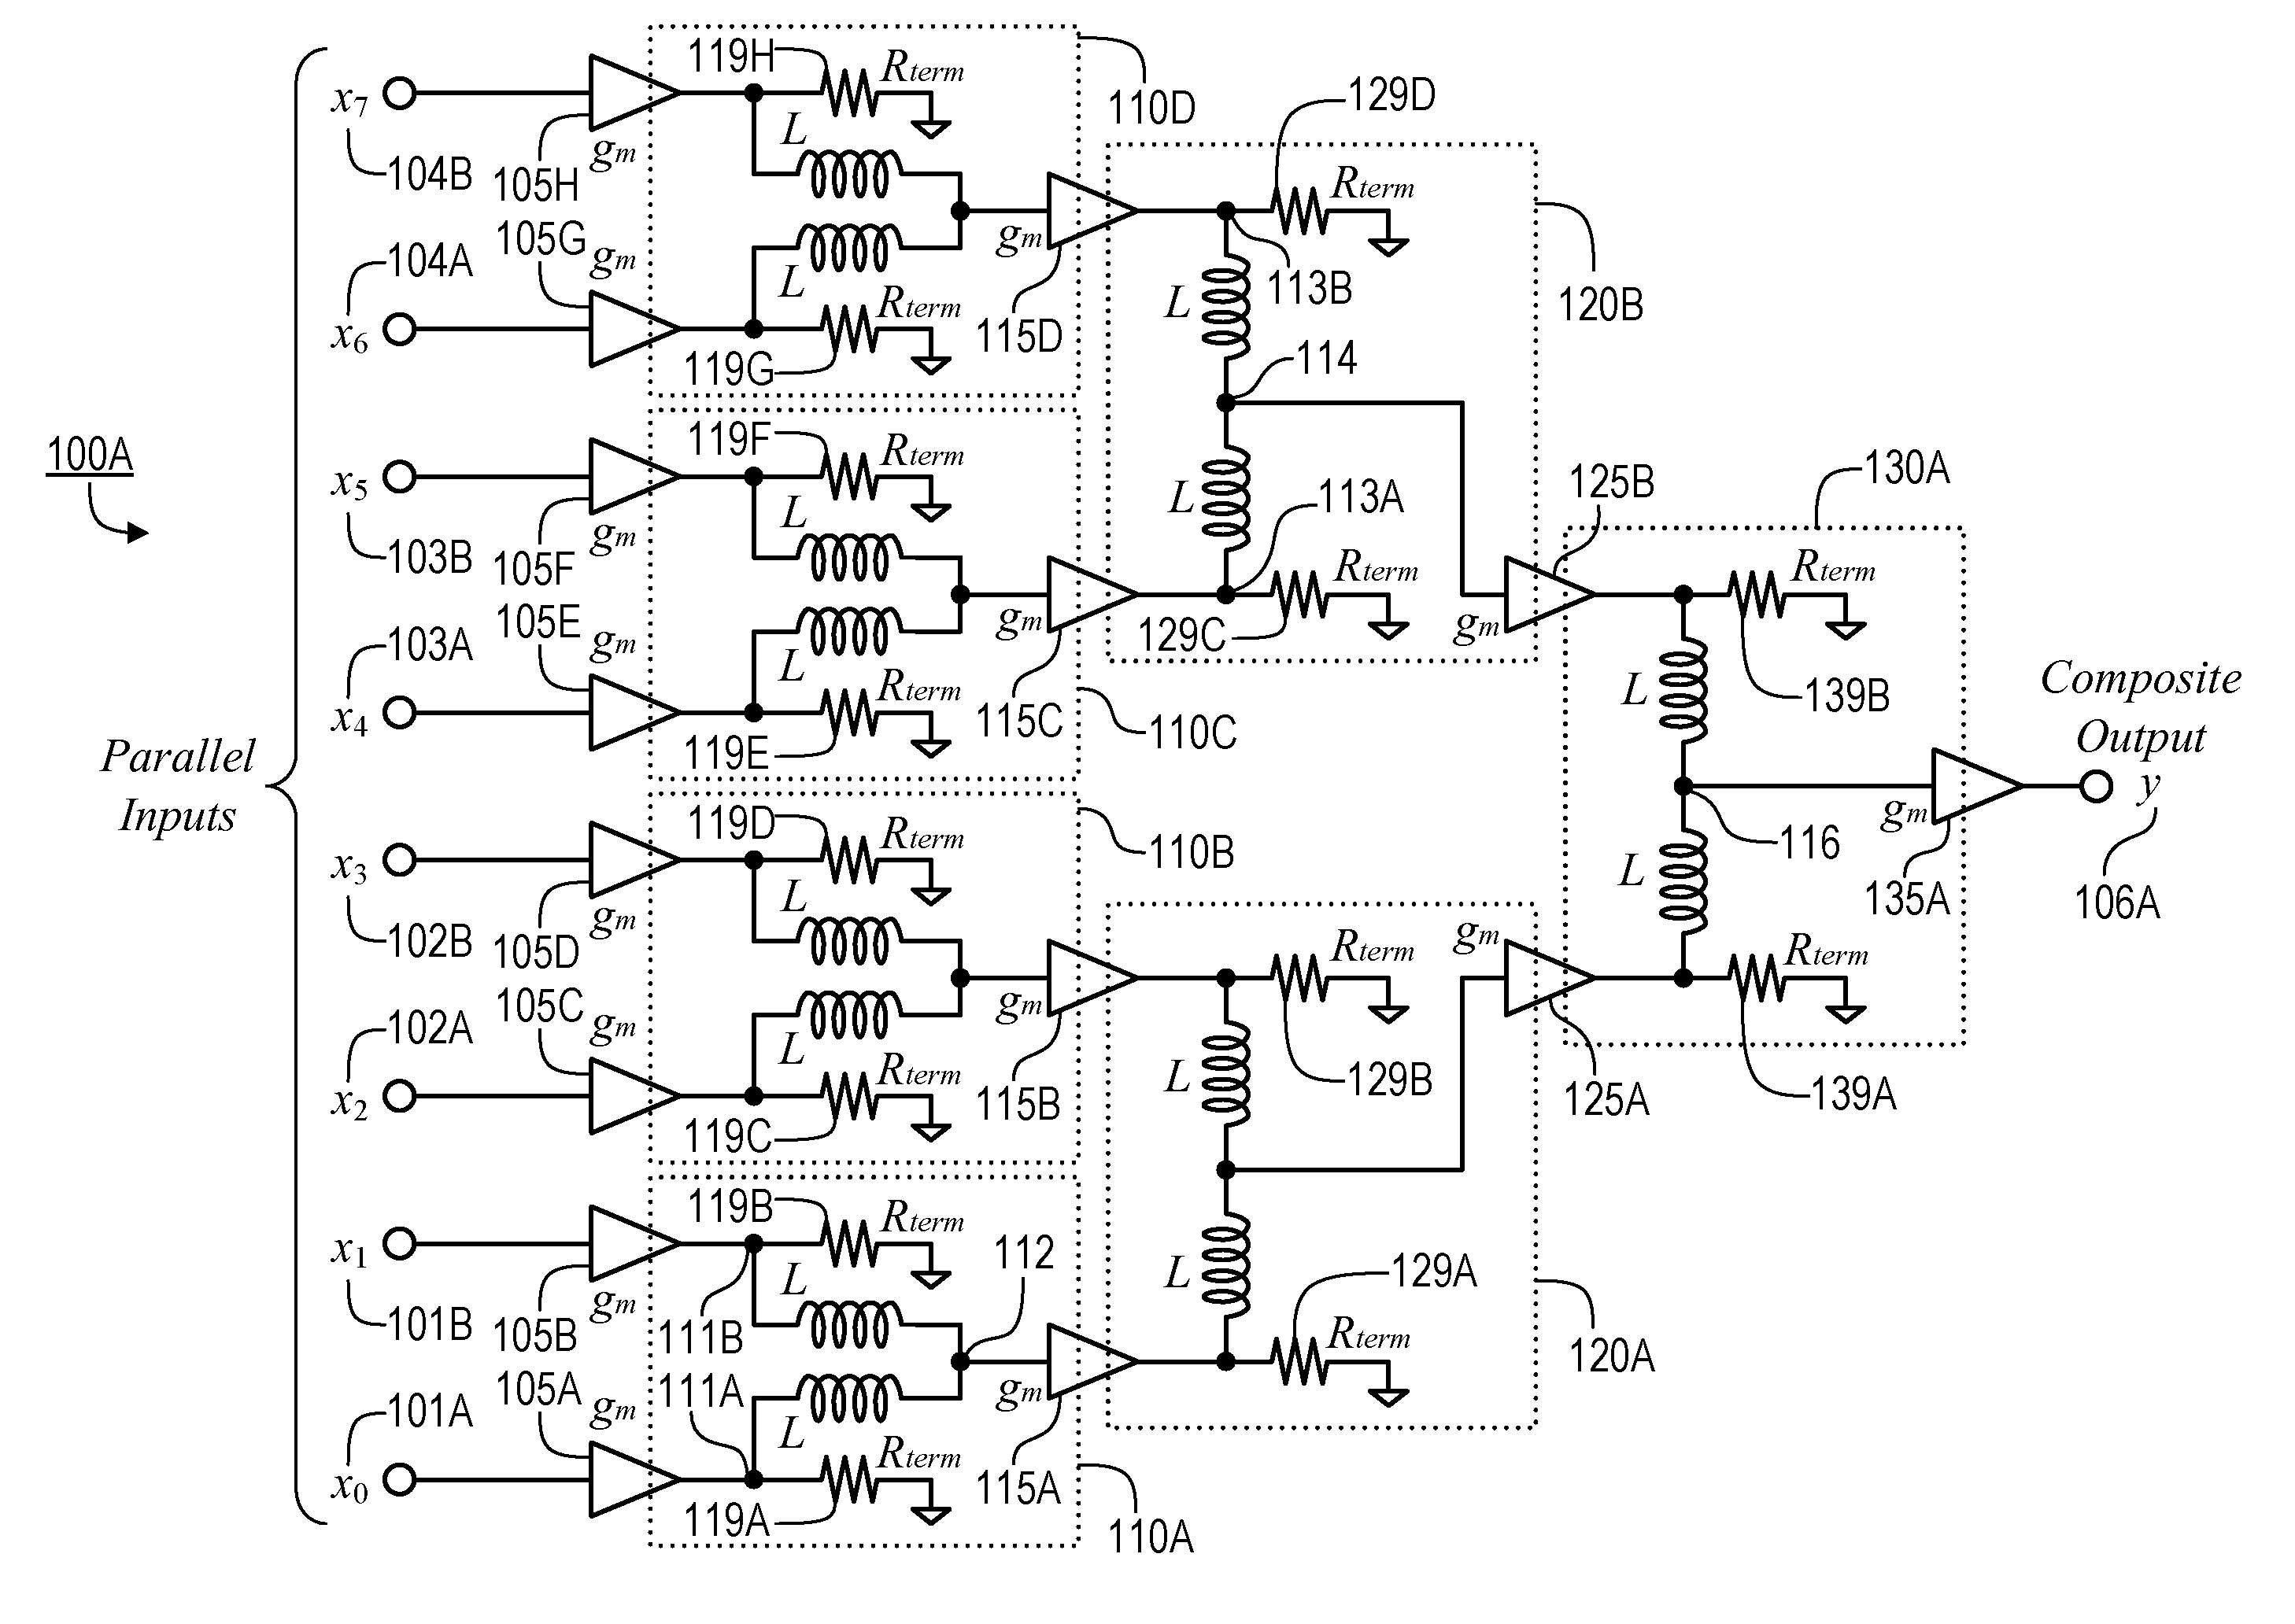 Distributed Combiner for Parallel Discrete-to-Linear Converters